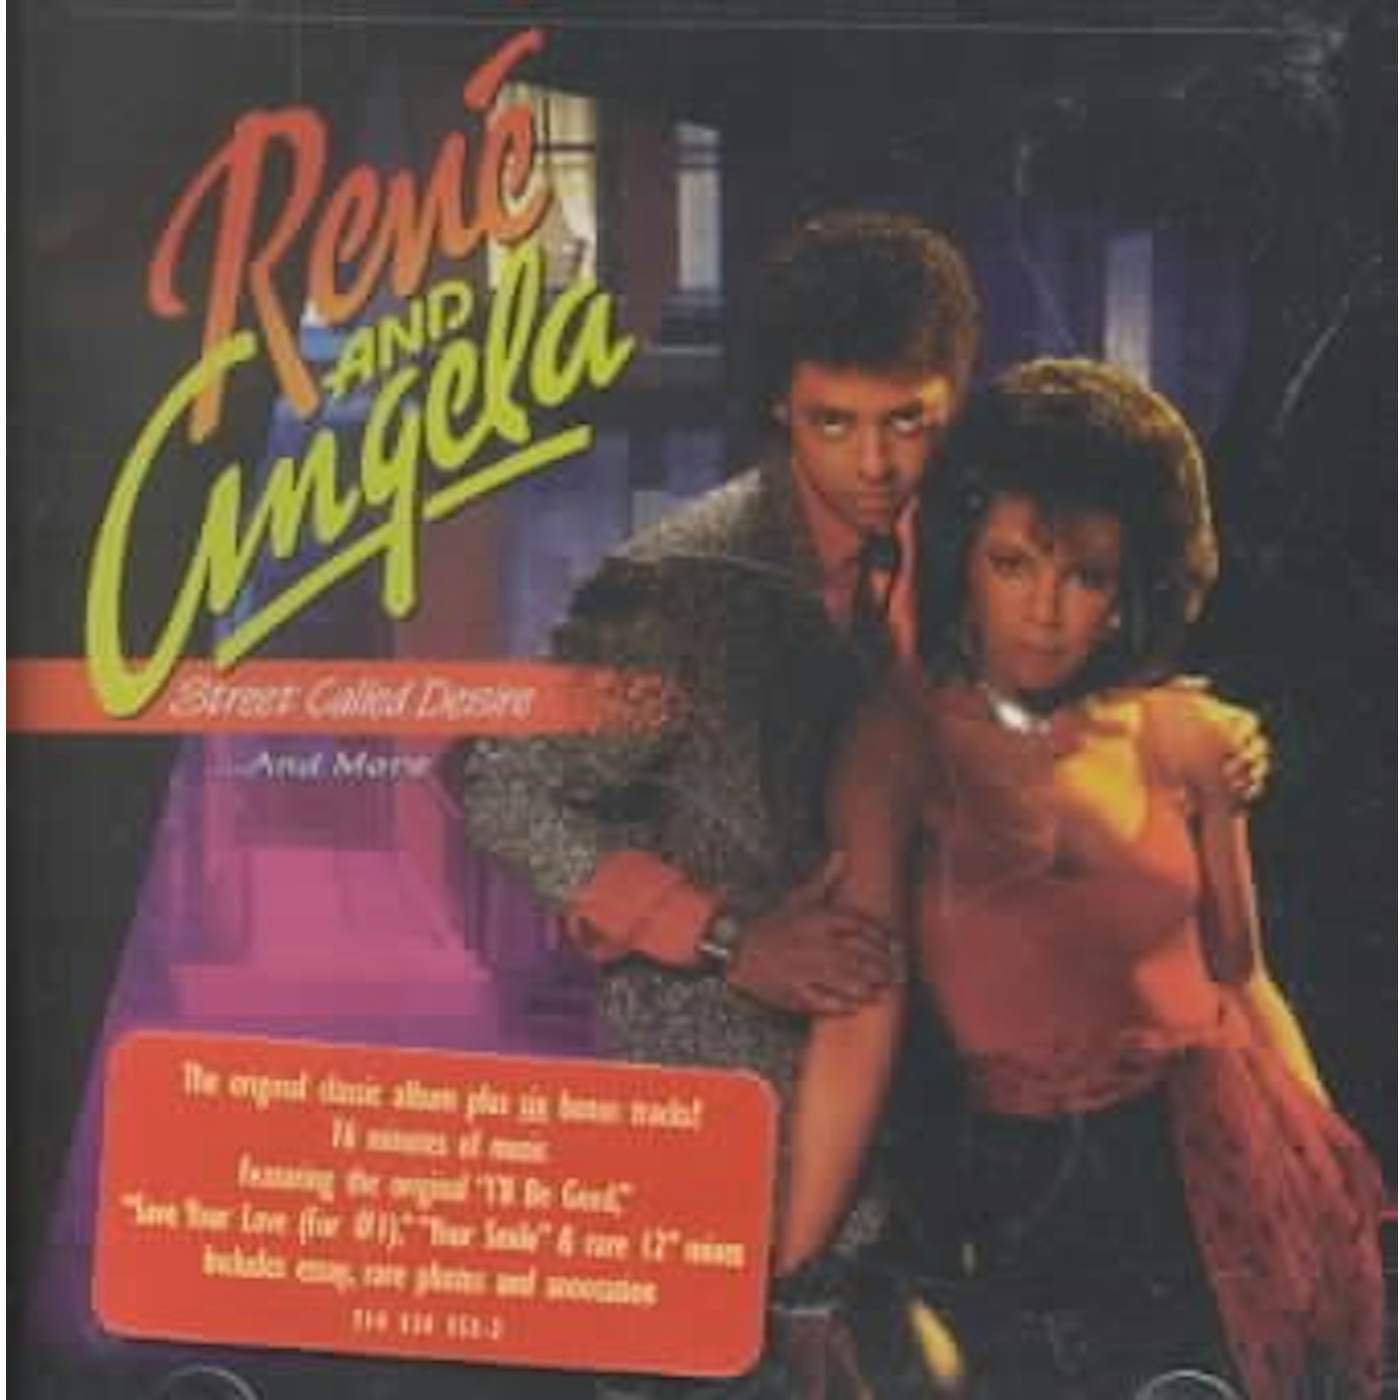 Rene & Angela Street Called Desire... And More CD